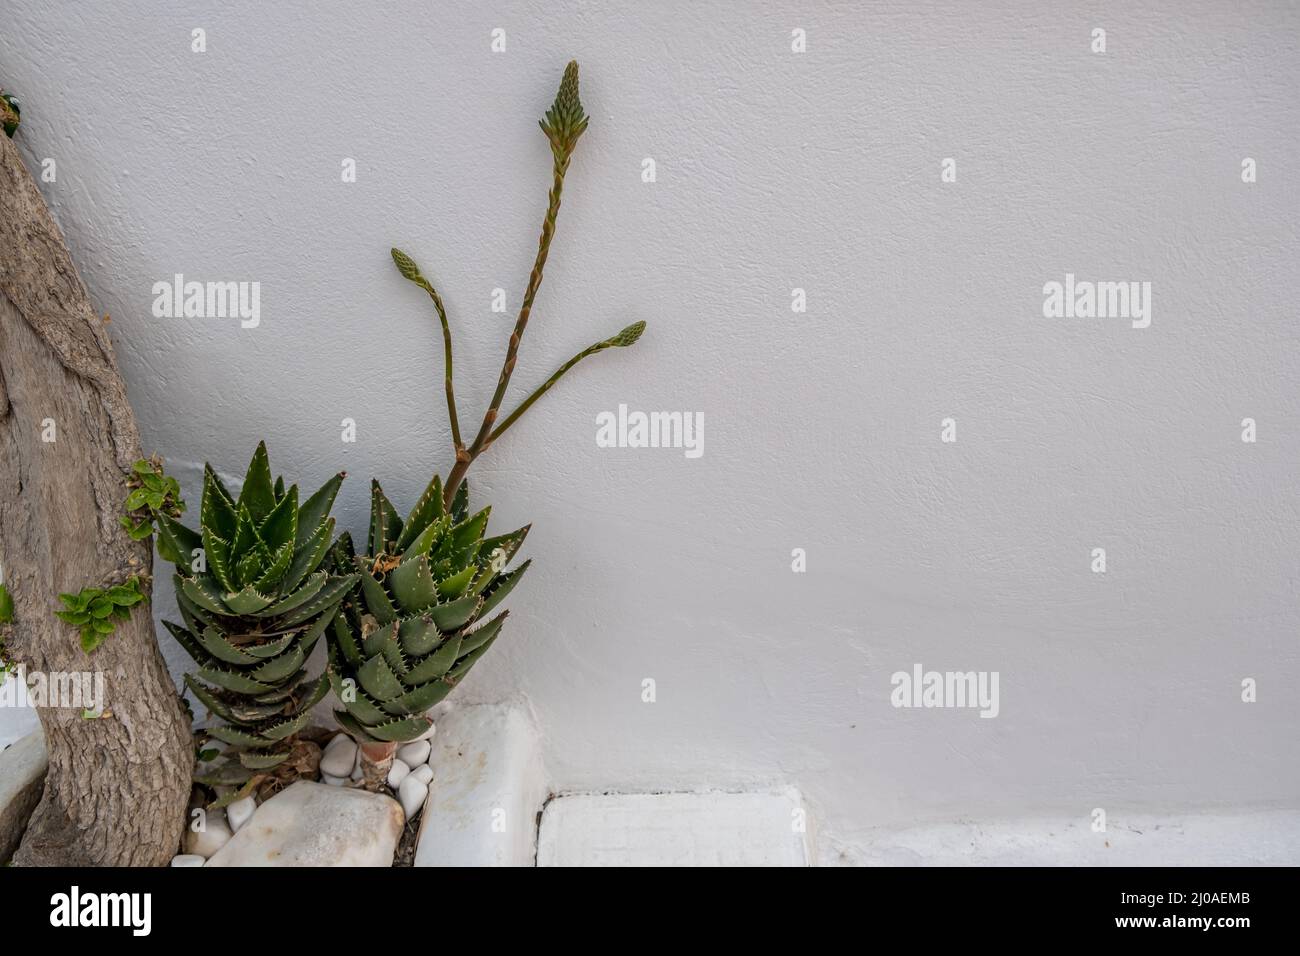 Cactus green blooming succulent plant with thorns on whitewashed wall background, copy space. Stock Photo